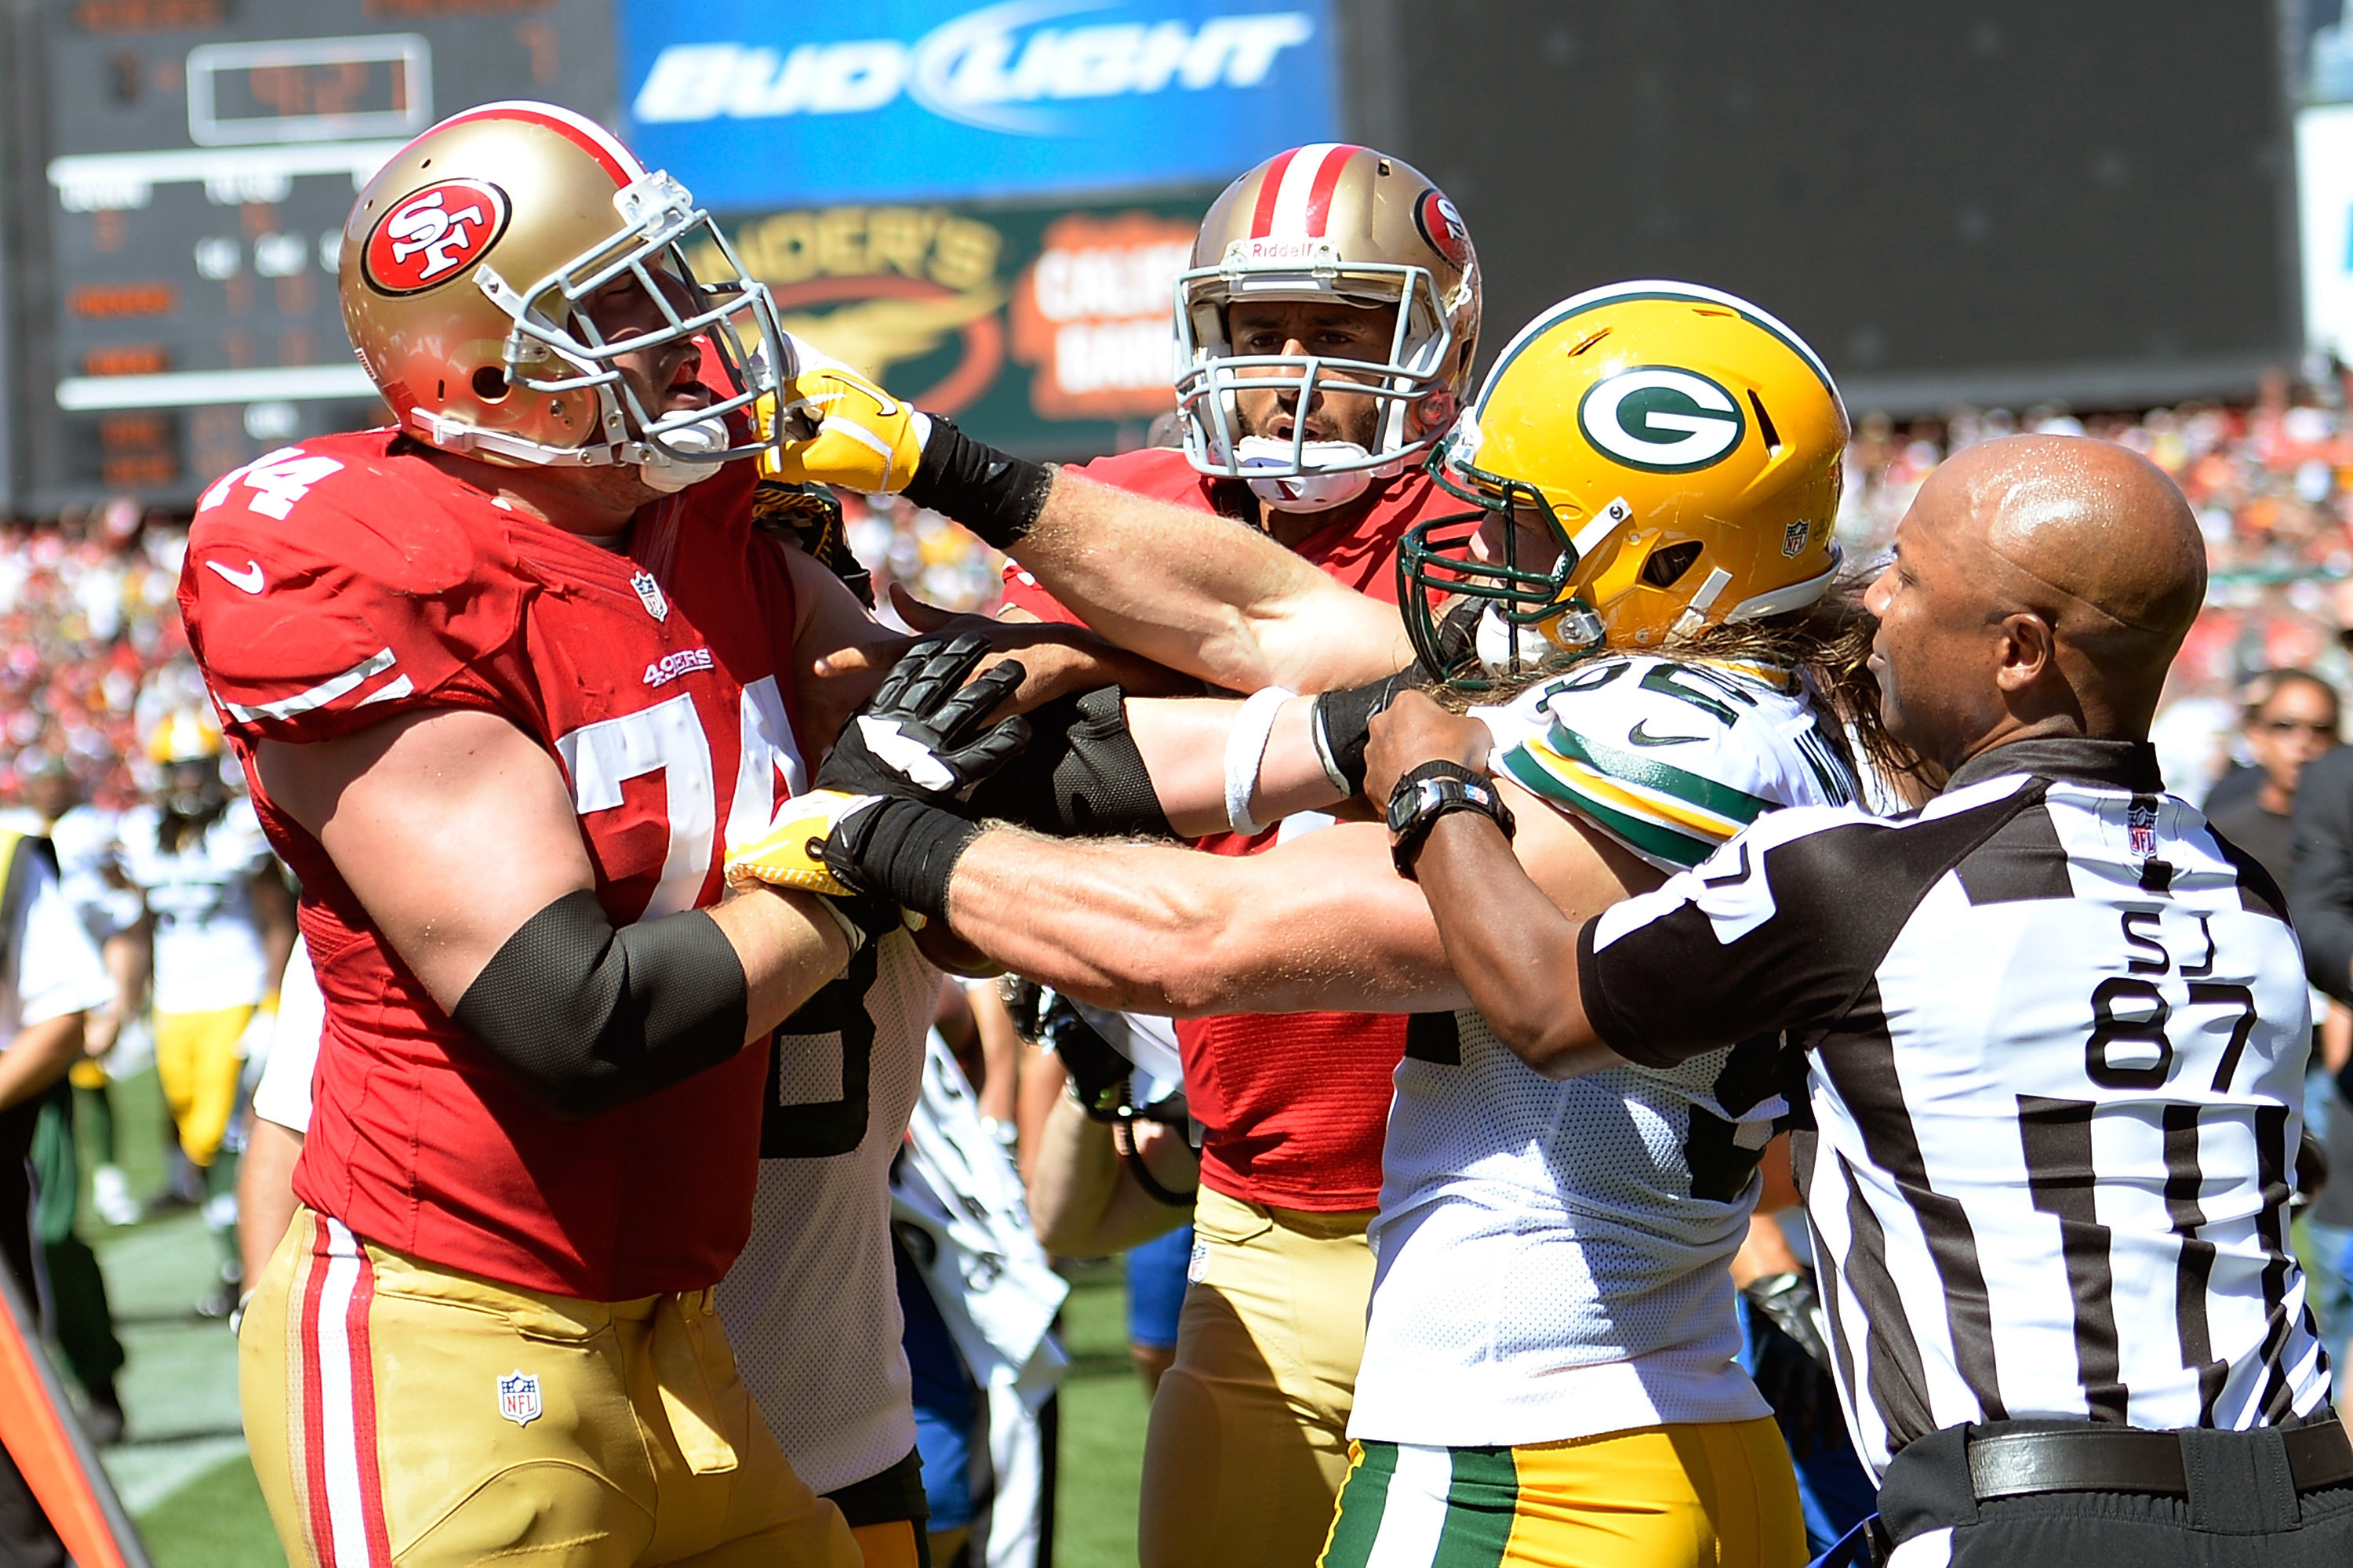 NFL Playoffs: San Francisco 49ers vs. Green Bay Packers, Wildcard Round  (Open Thread) - Dawgs By Nature